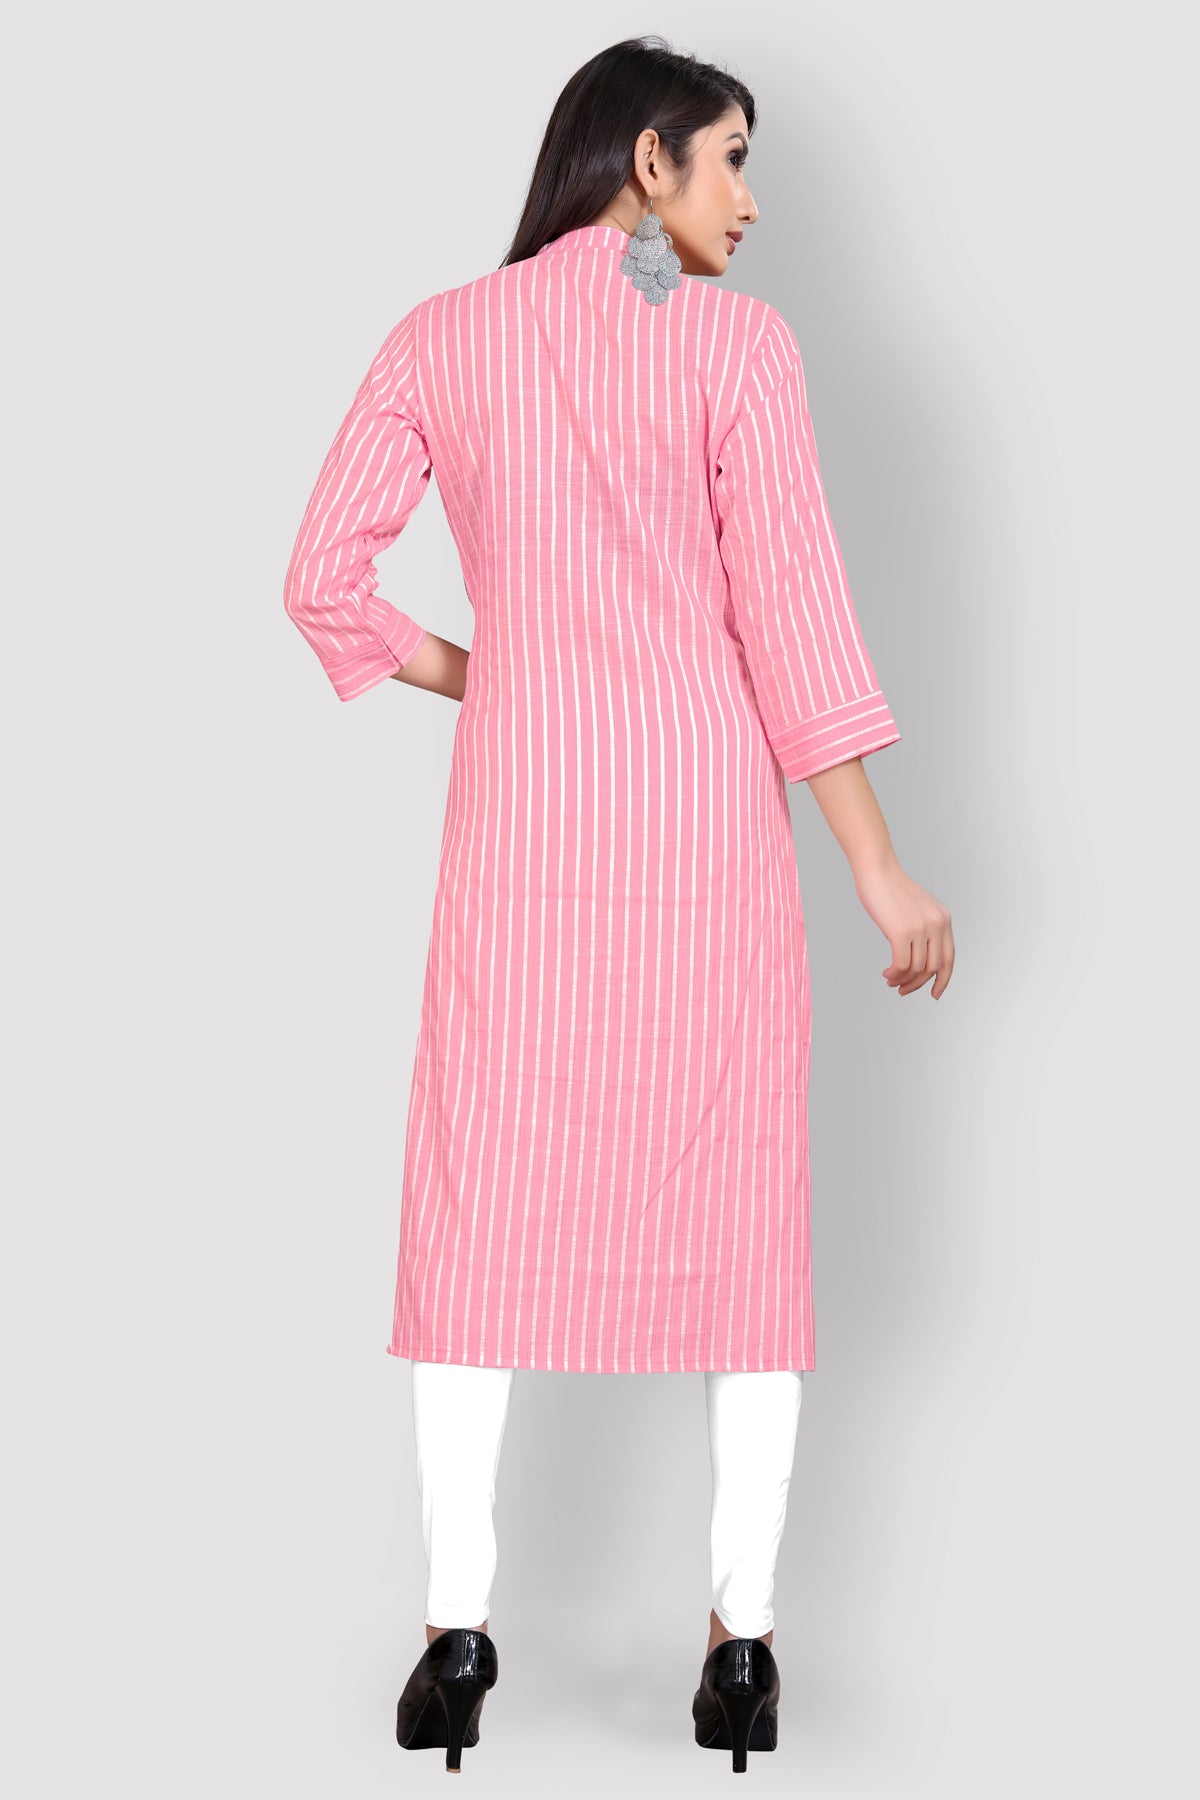 Buy Front slit cotton Kurta with Embroidery work